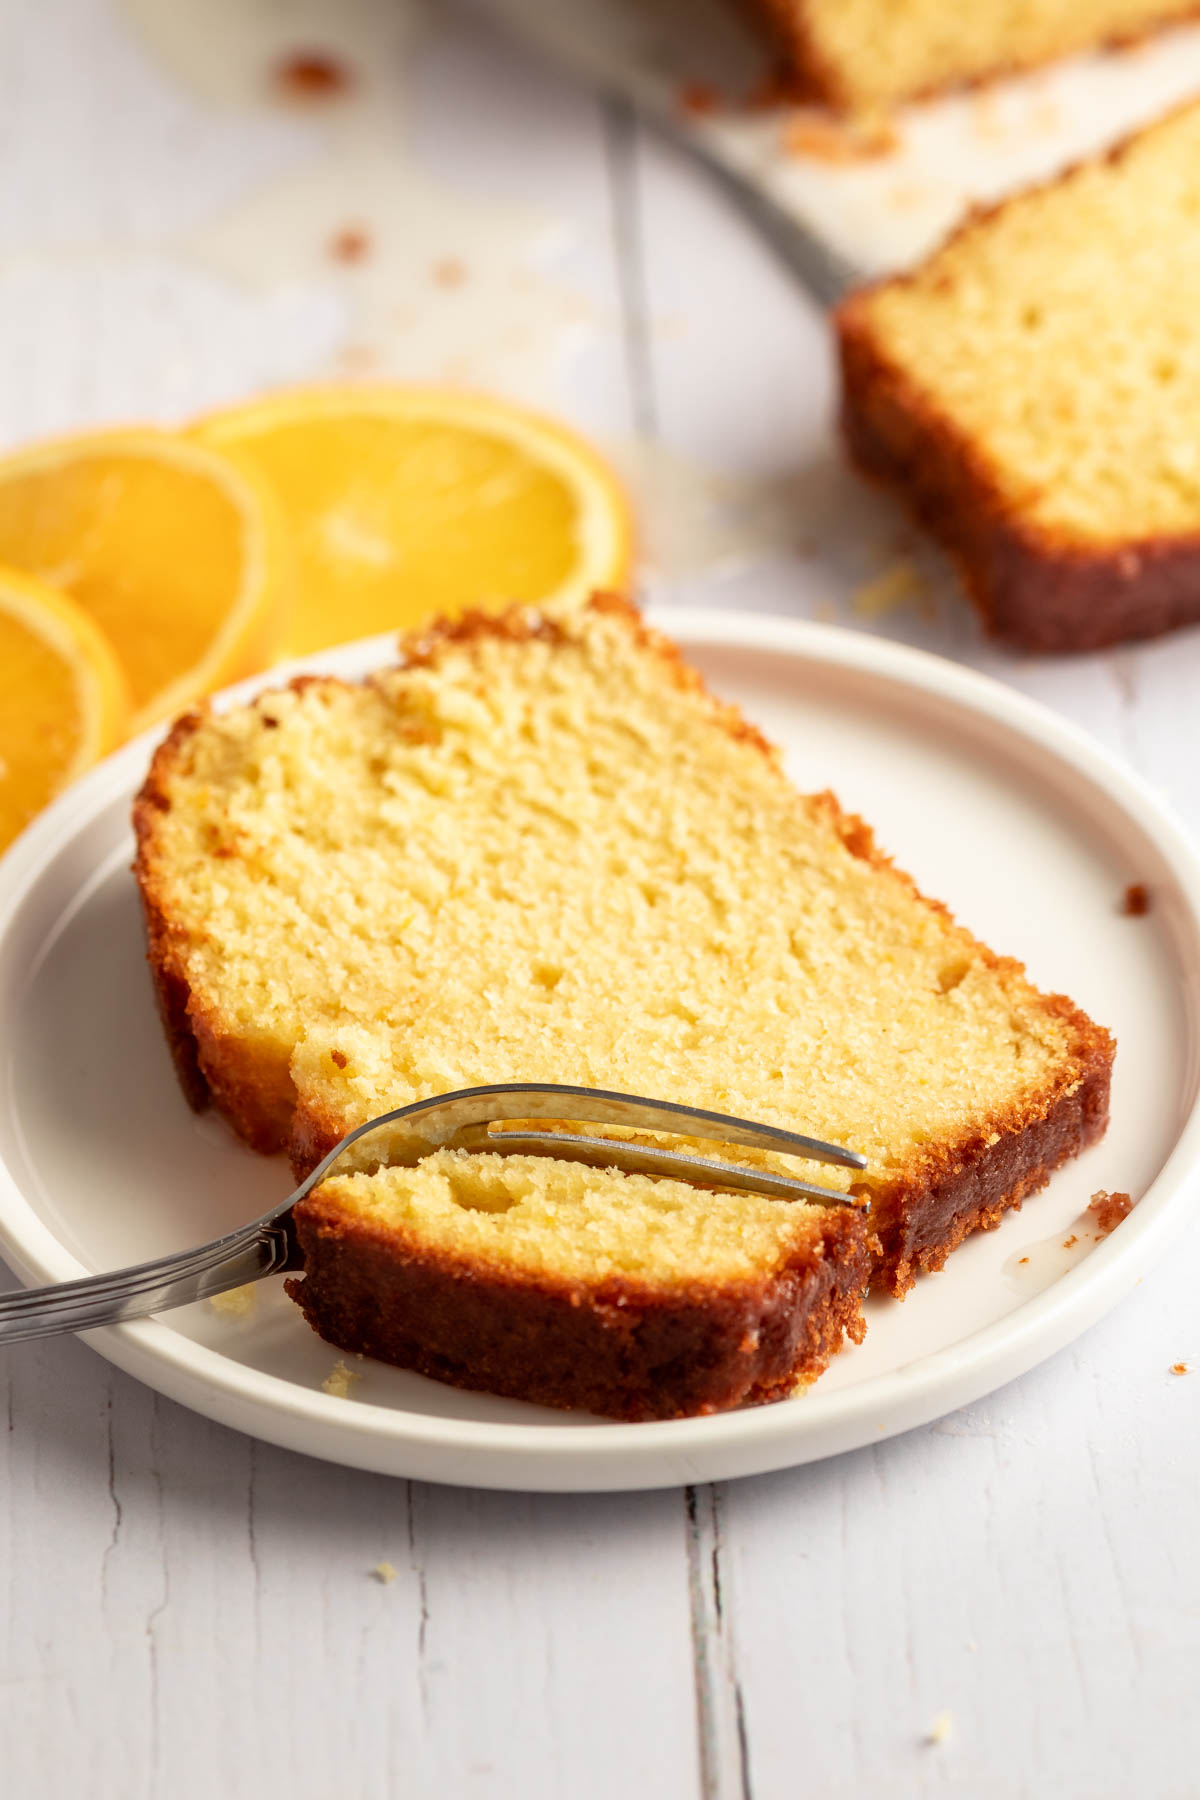 Slice of pound cake on a plate with a fork inserted into the slice.